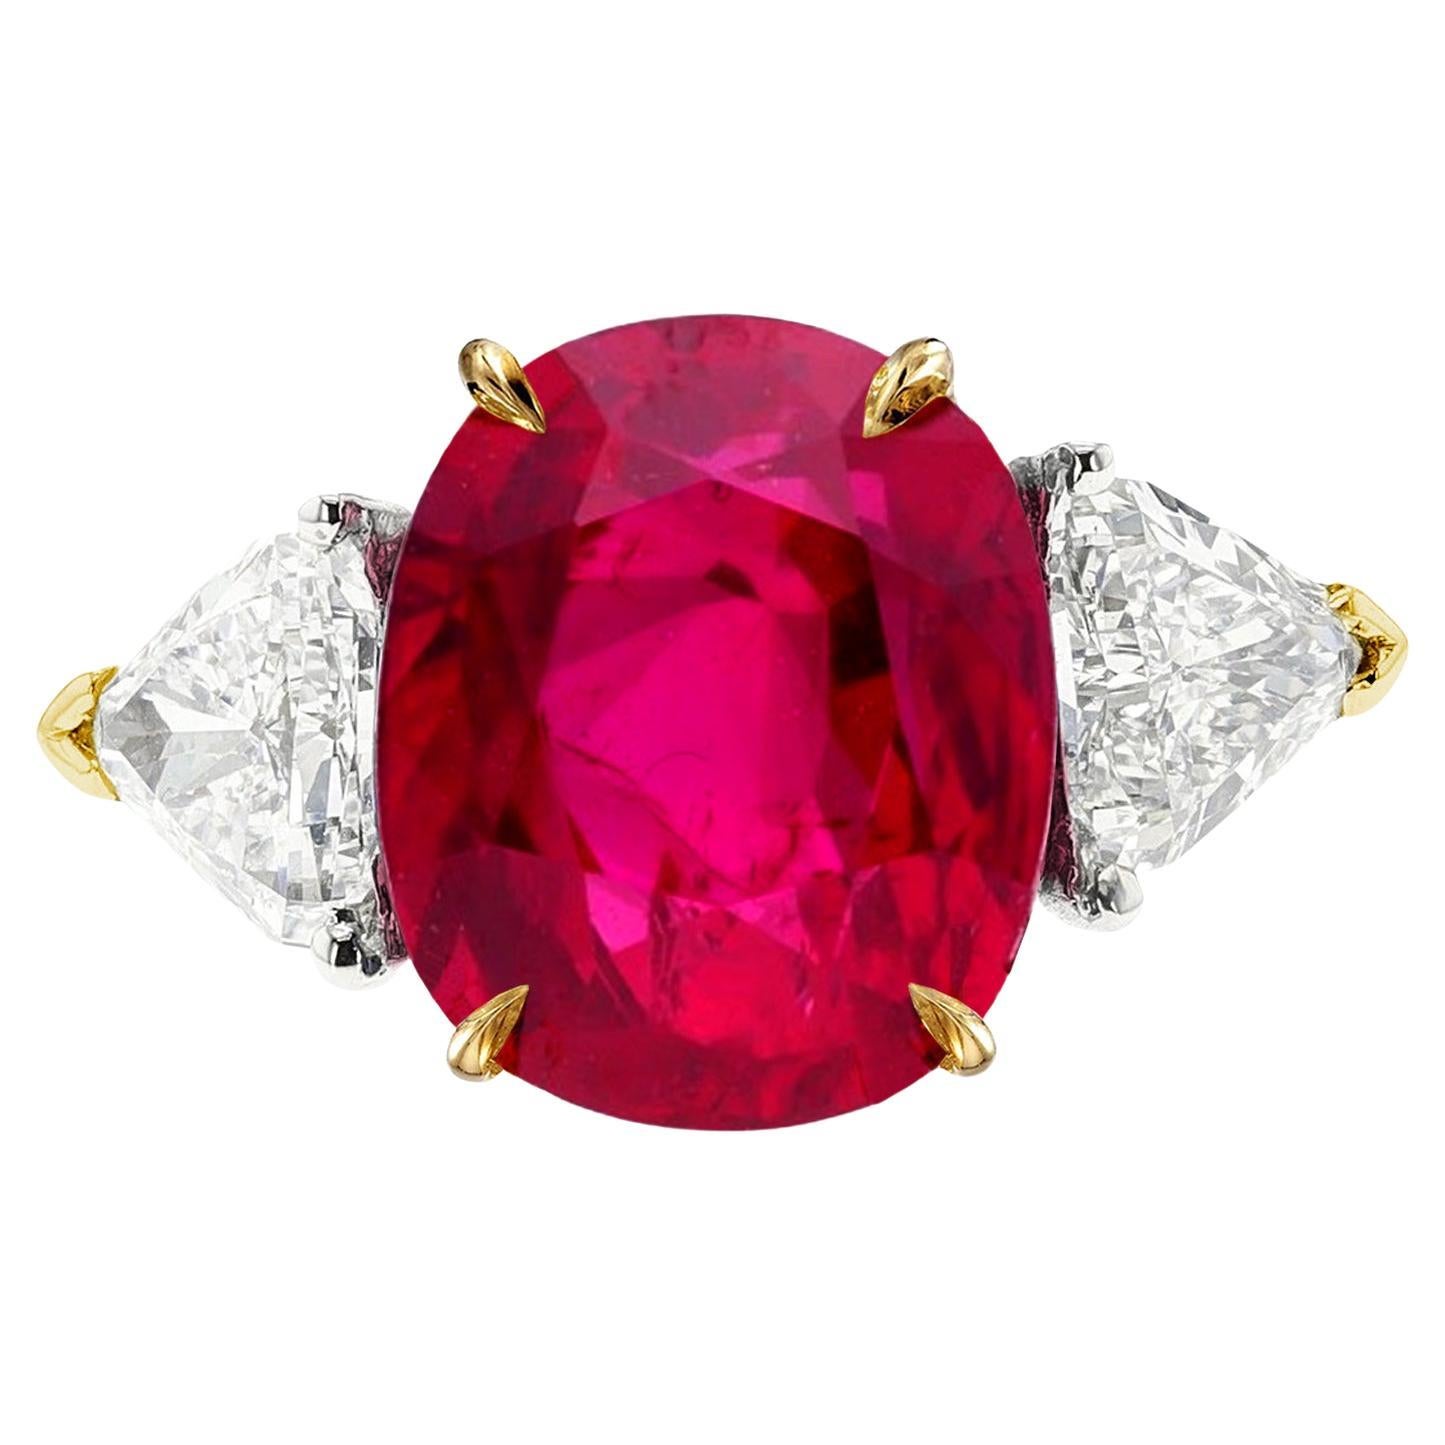 GIA Certified Unheated Untreated 4 Carat Oval Ruby Diamond Ring